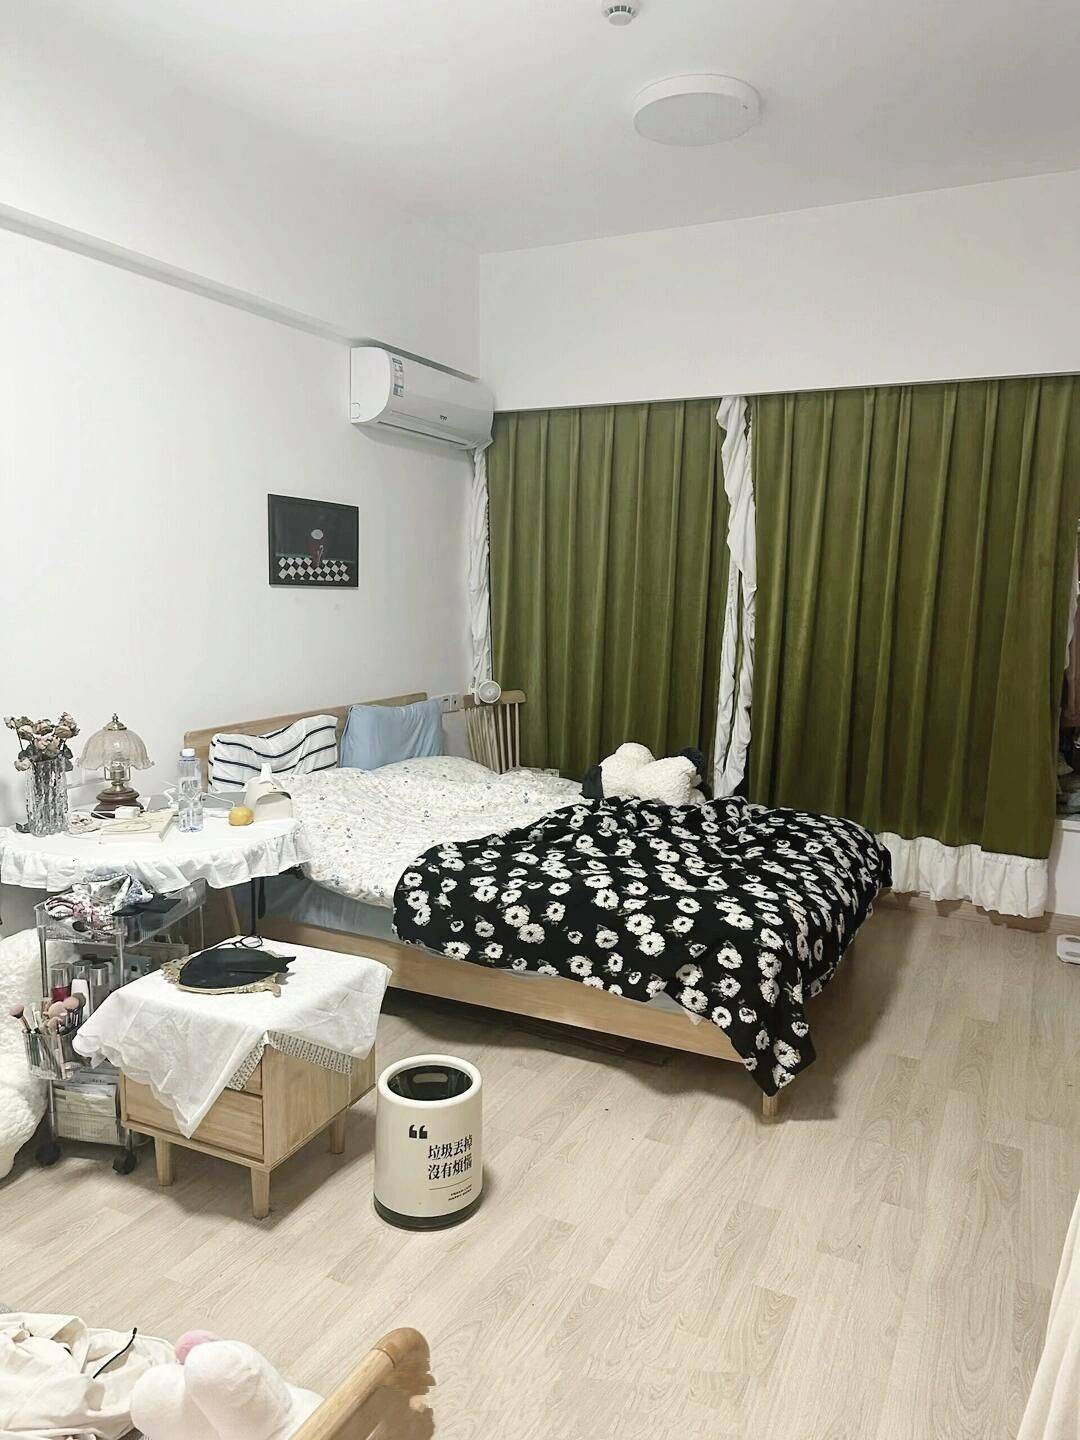 Ningbo-Haishu-Cozy Home,Clean&Comfy,No Gender Limit,Chilled,Pet Friendly